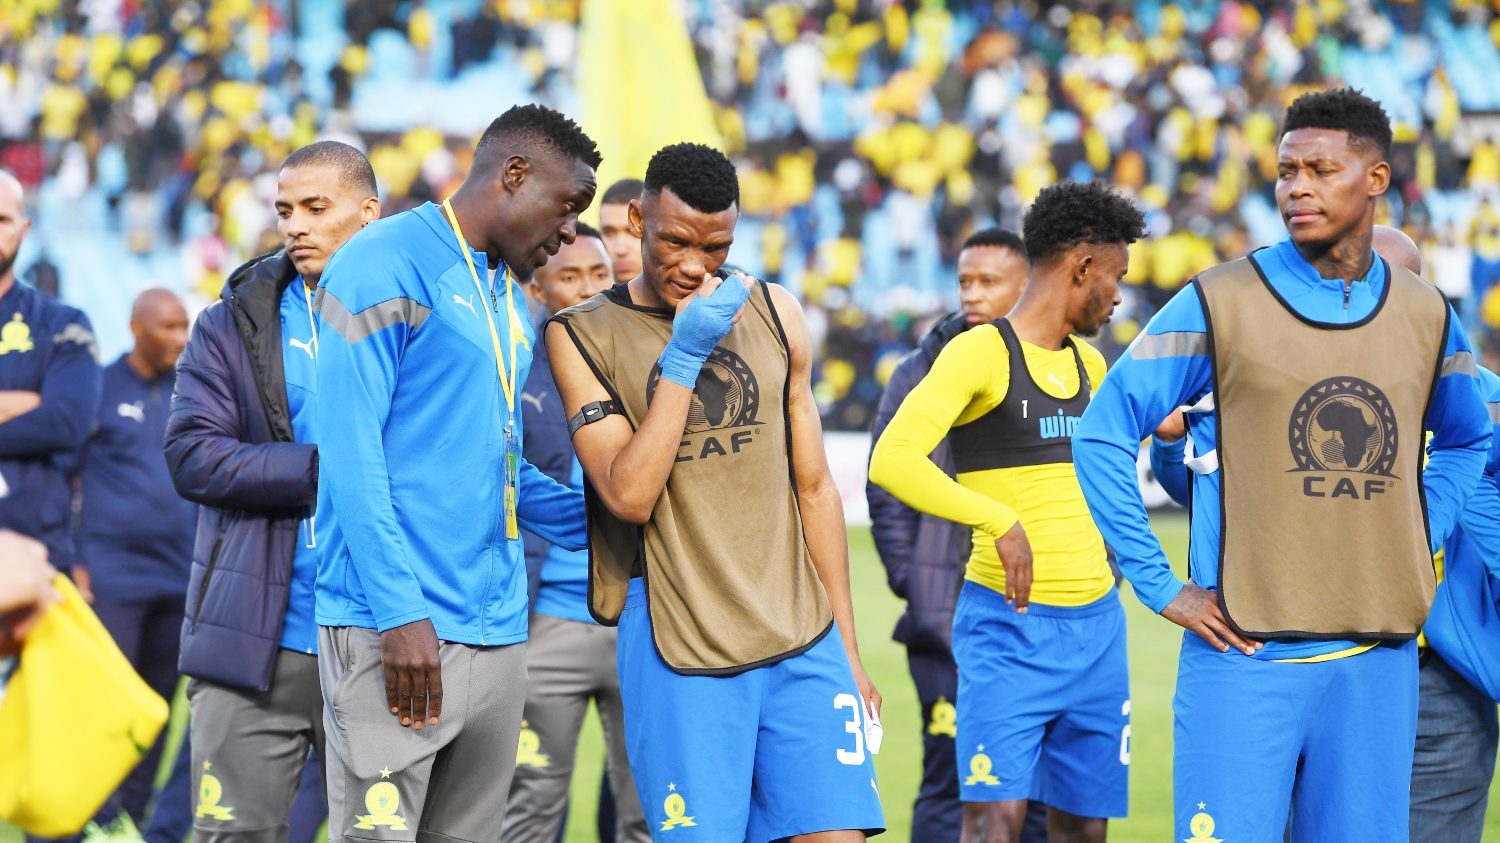 Mamelodi Sundowns players after a game having a chat